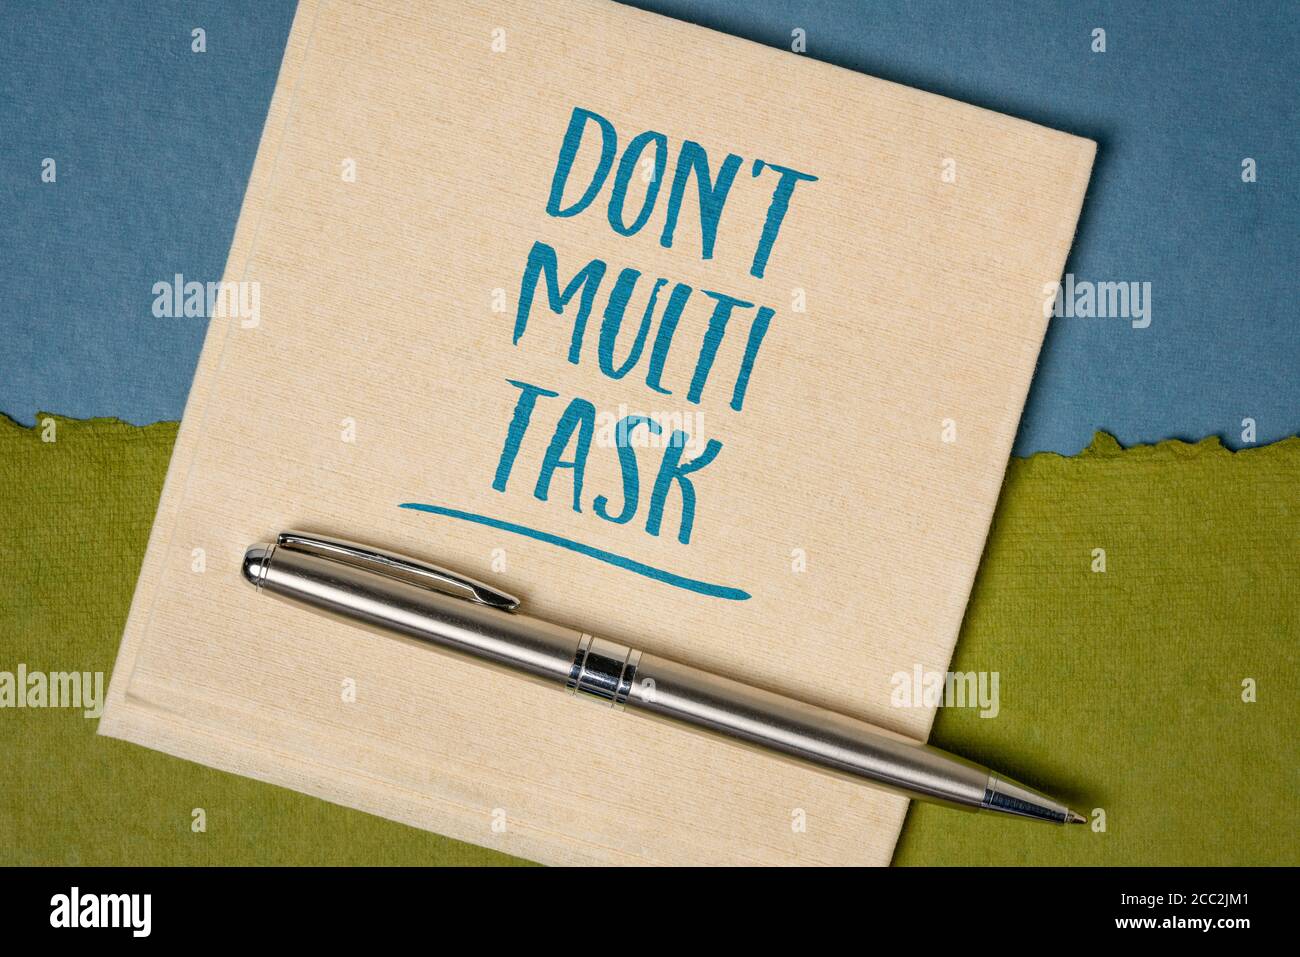 do not multitask -  efficiency advice or reminder - handwriting on a napkin, business and personal development concept Stock Photo